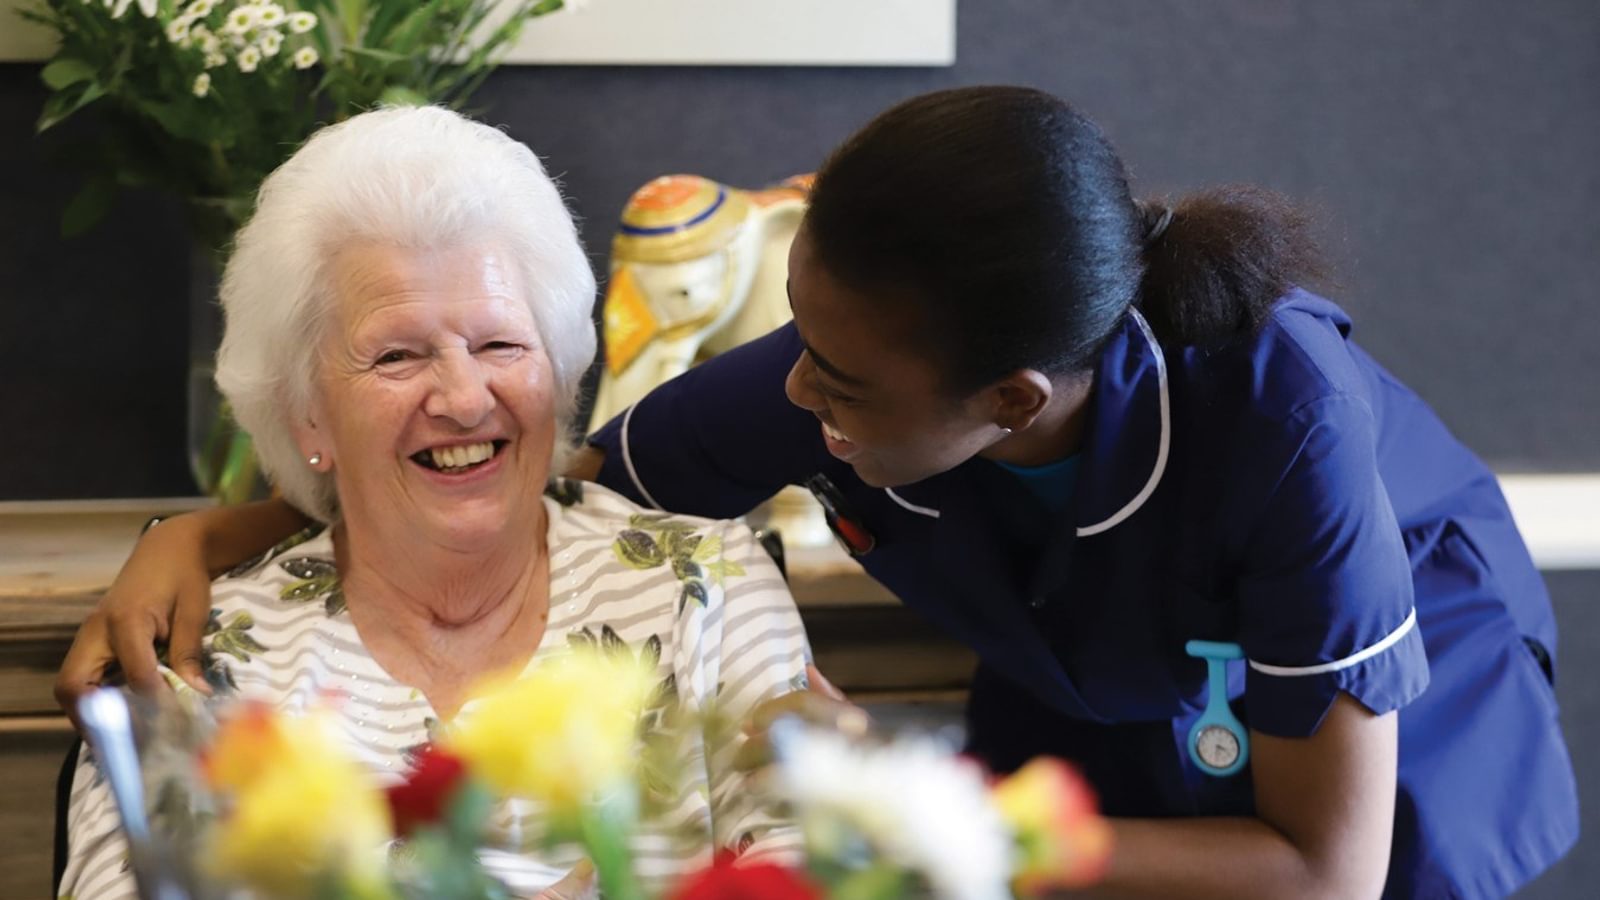 Member of staff at Caring Homes care home caring for elderly resident